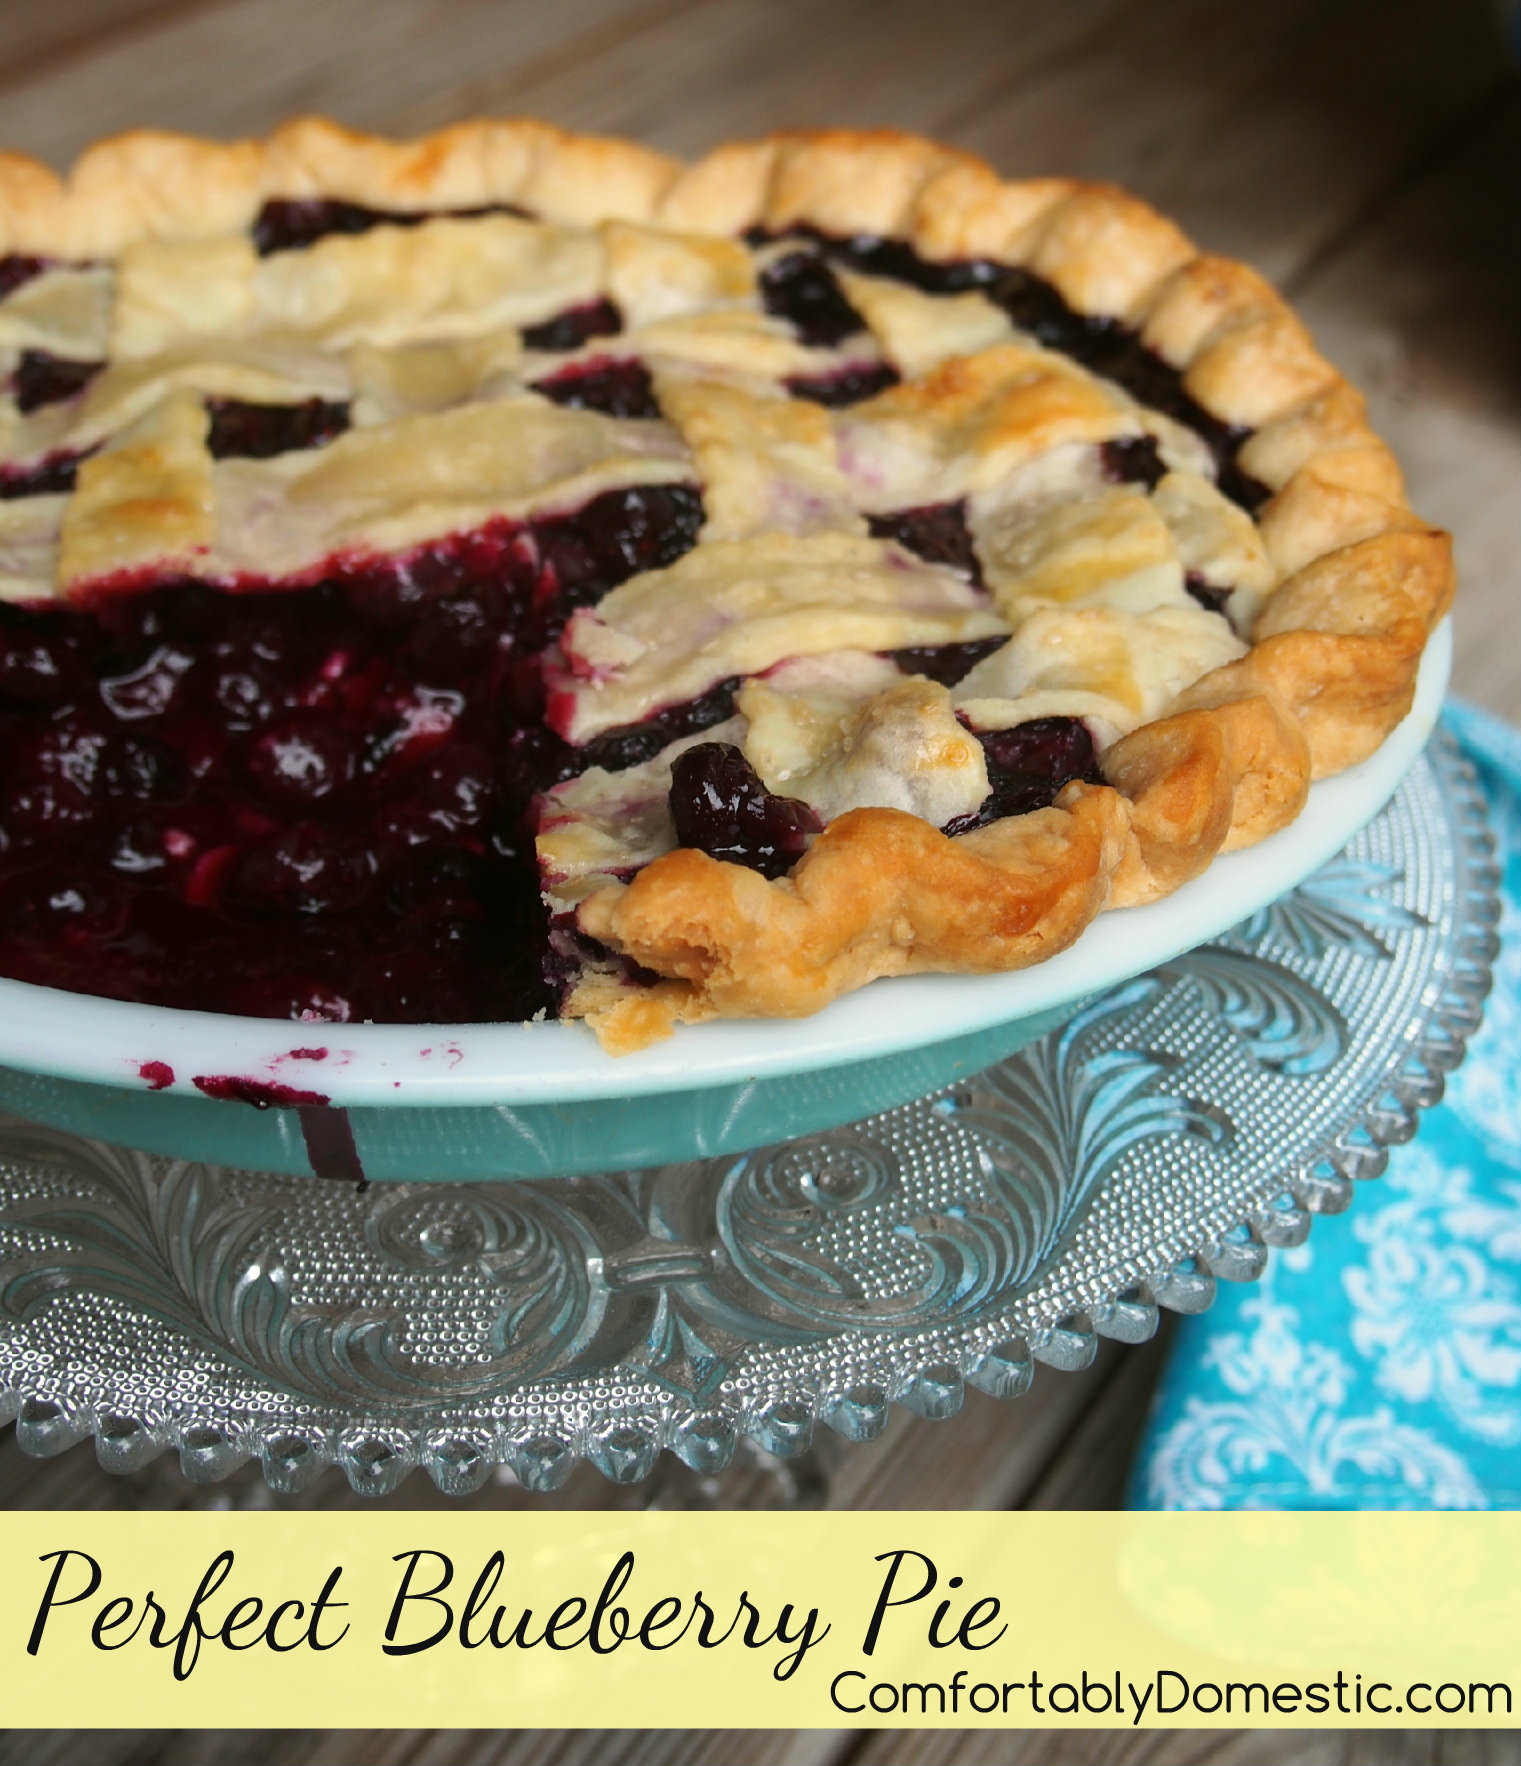 Perfect Blueberry Pie | ComfortablyDomestic.com | The BEST blueberry pie has juicy blueberries, a little lemon, and sugar nestled in a flaky all butter crust.